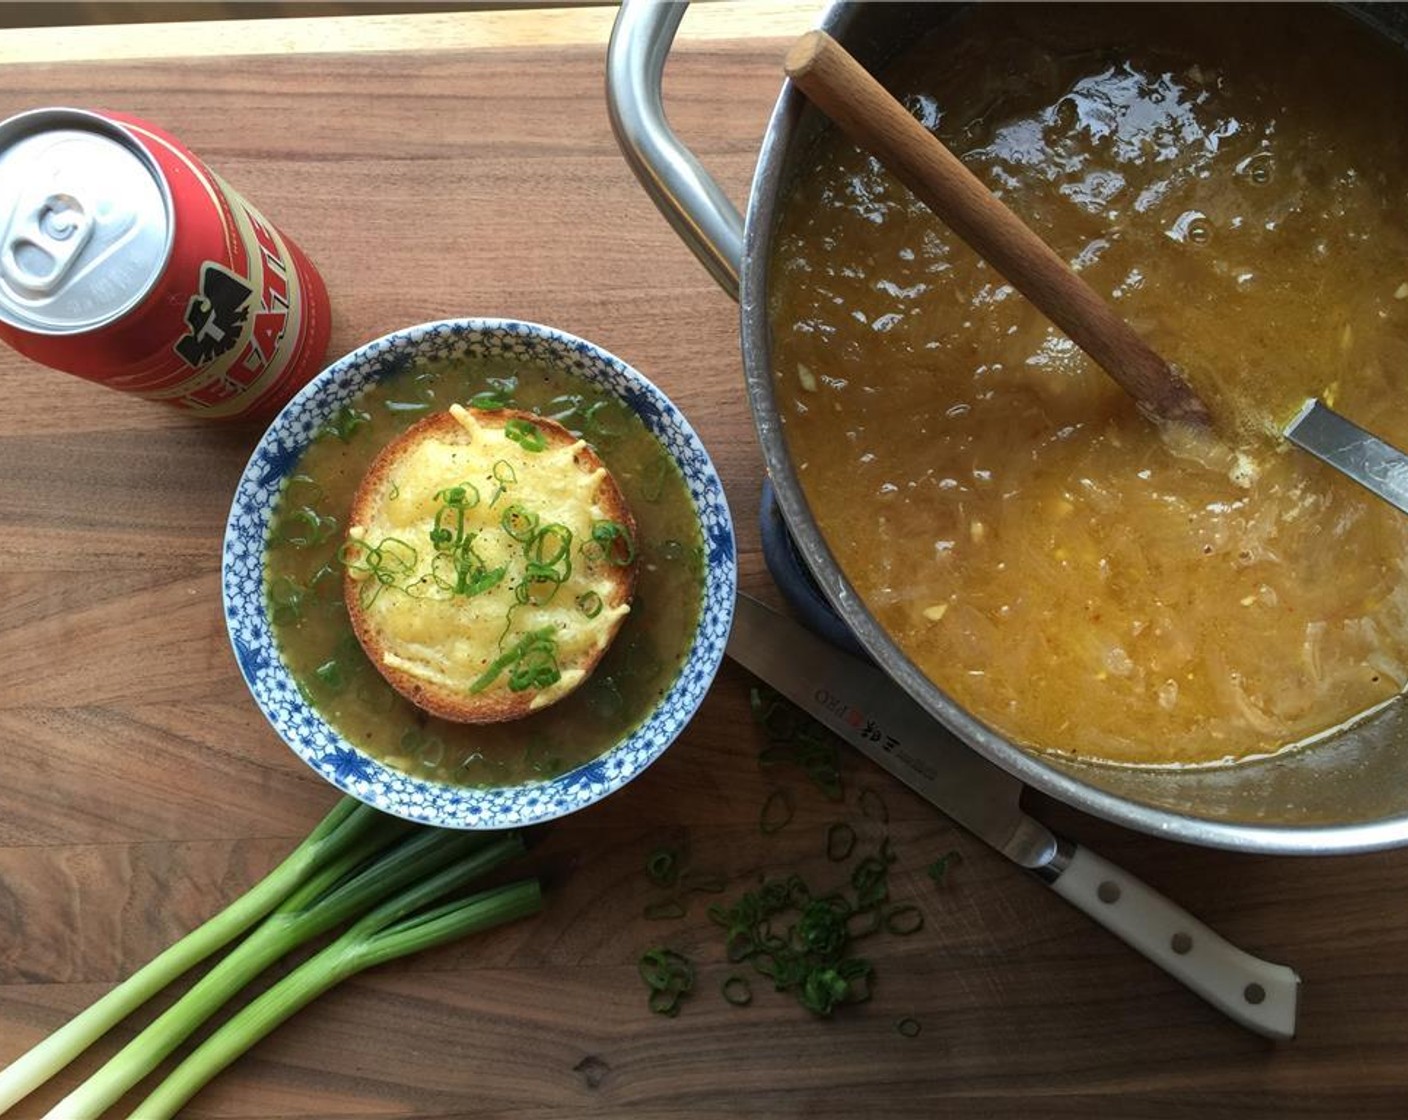 step 16 Ladle soup into bowls. Top with that cheesy roll and sliced scallion. Enjoy folks!